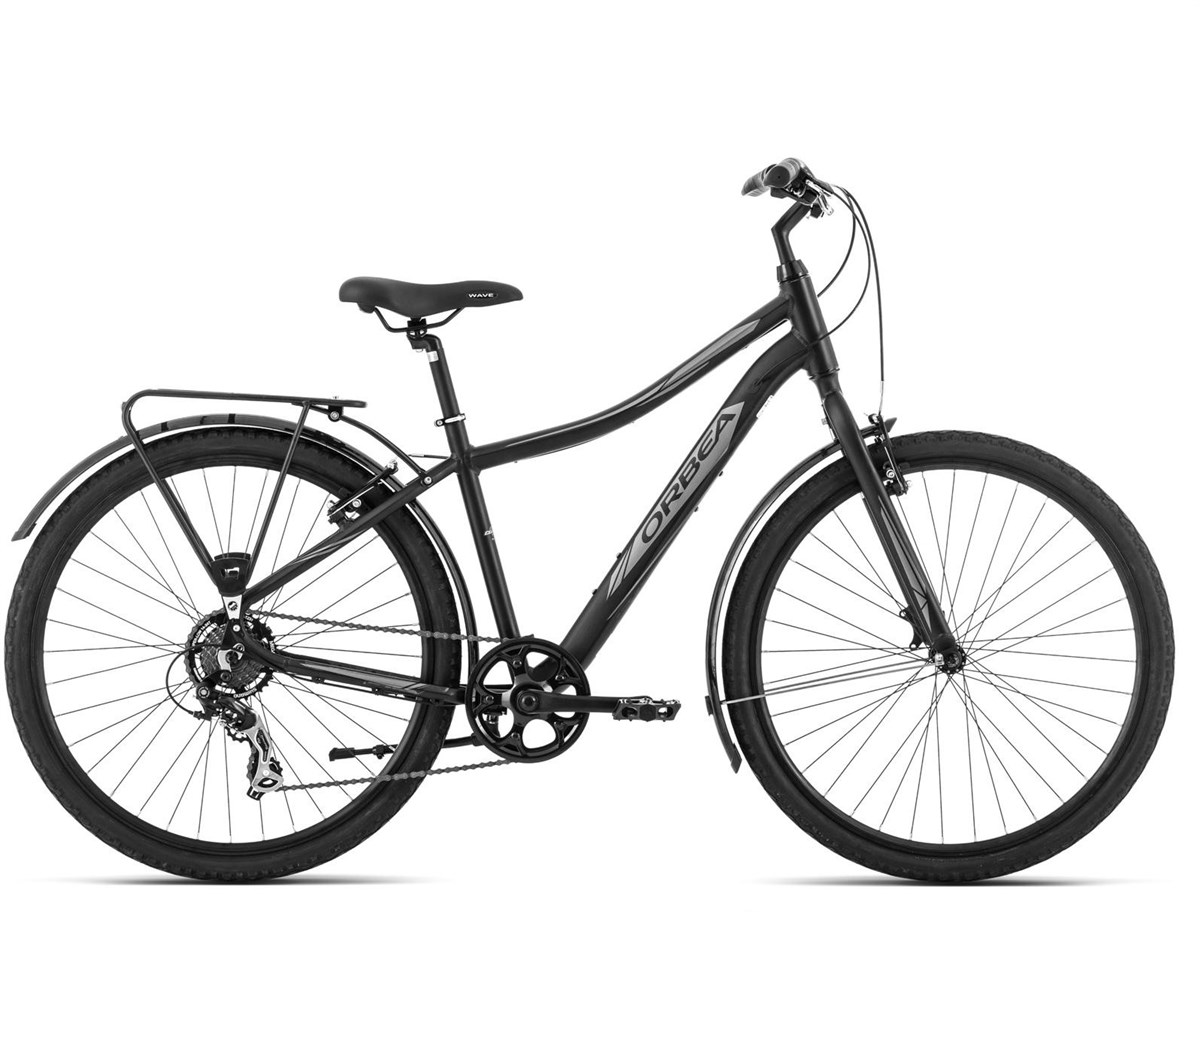 Orbea Comfort 28 30 Entrance Equipped  2015 - Hybrid Sports Bike product image